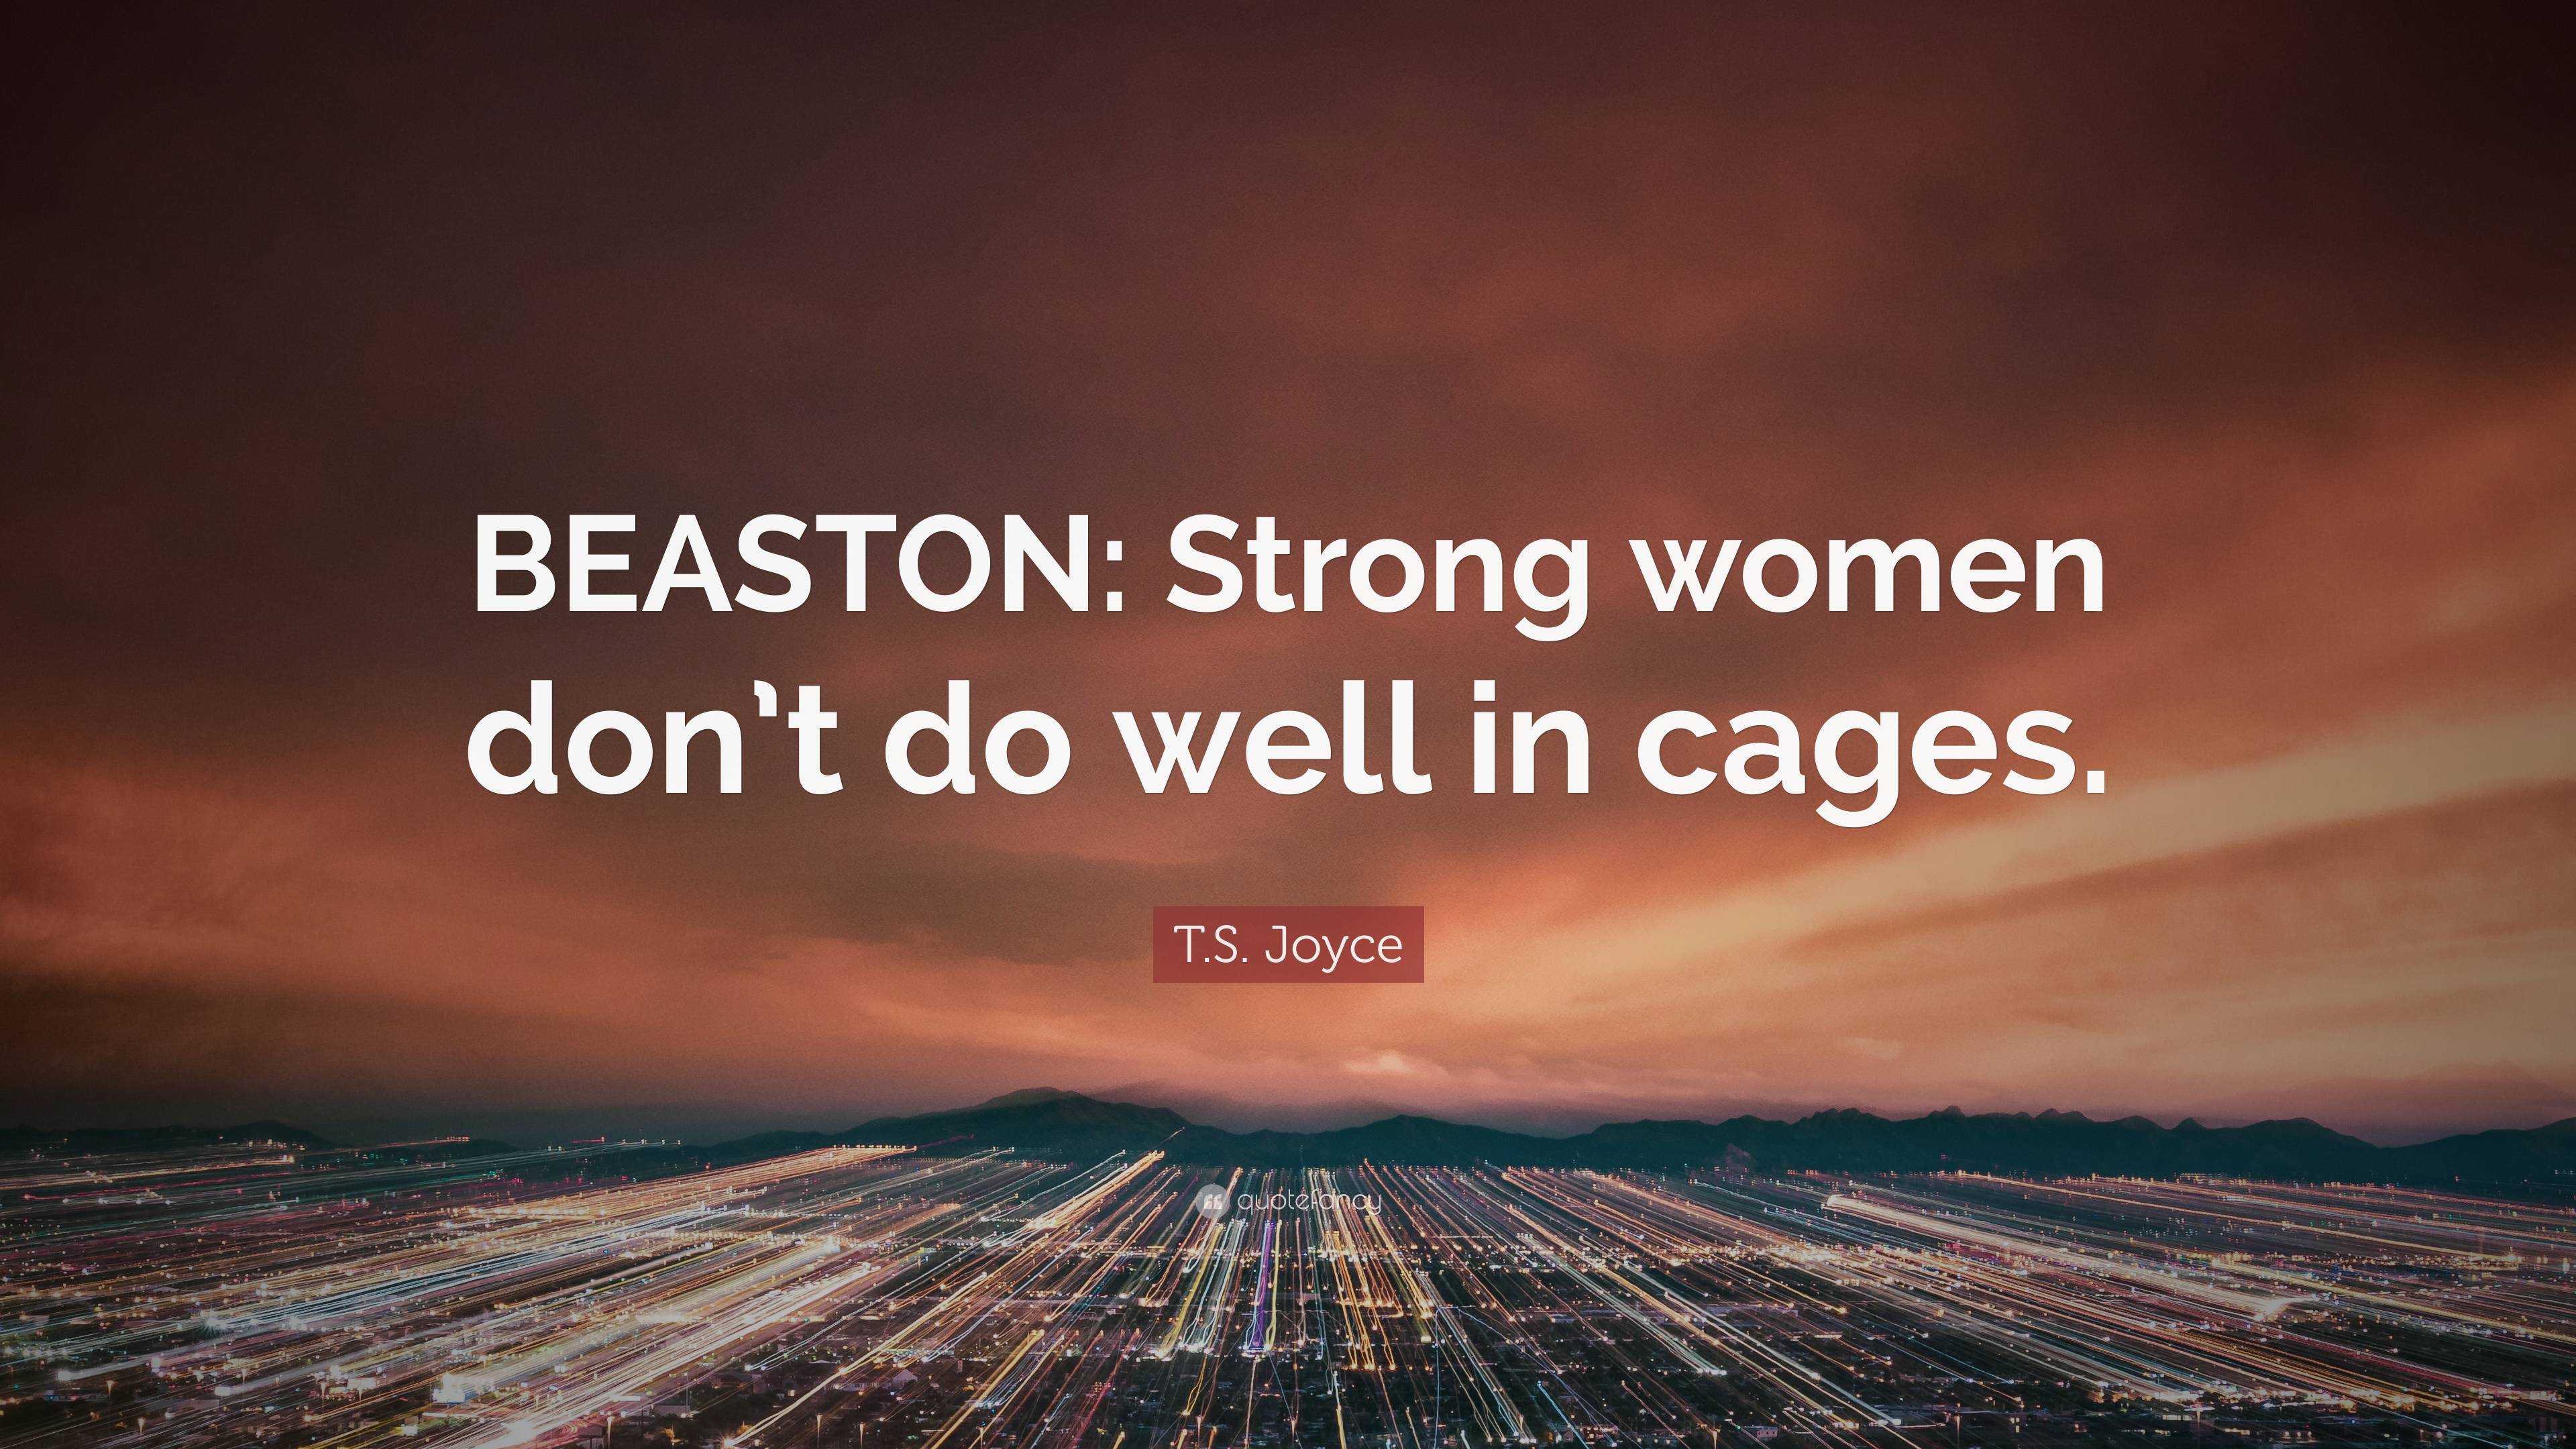 I want to be a strong woman - reflections from me